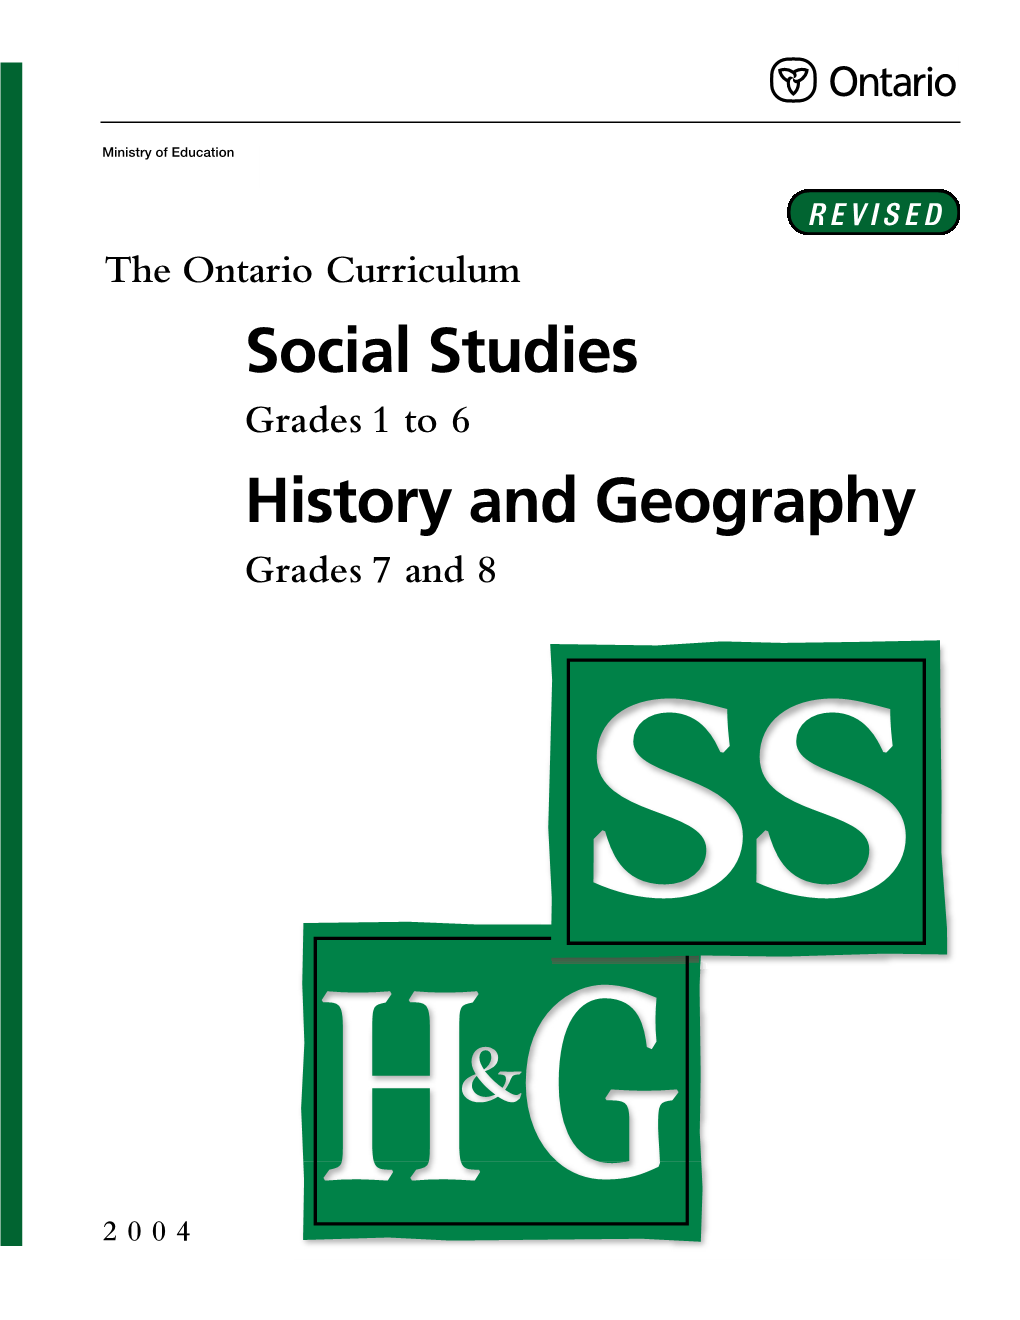 Social Studies History and Geography